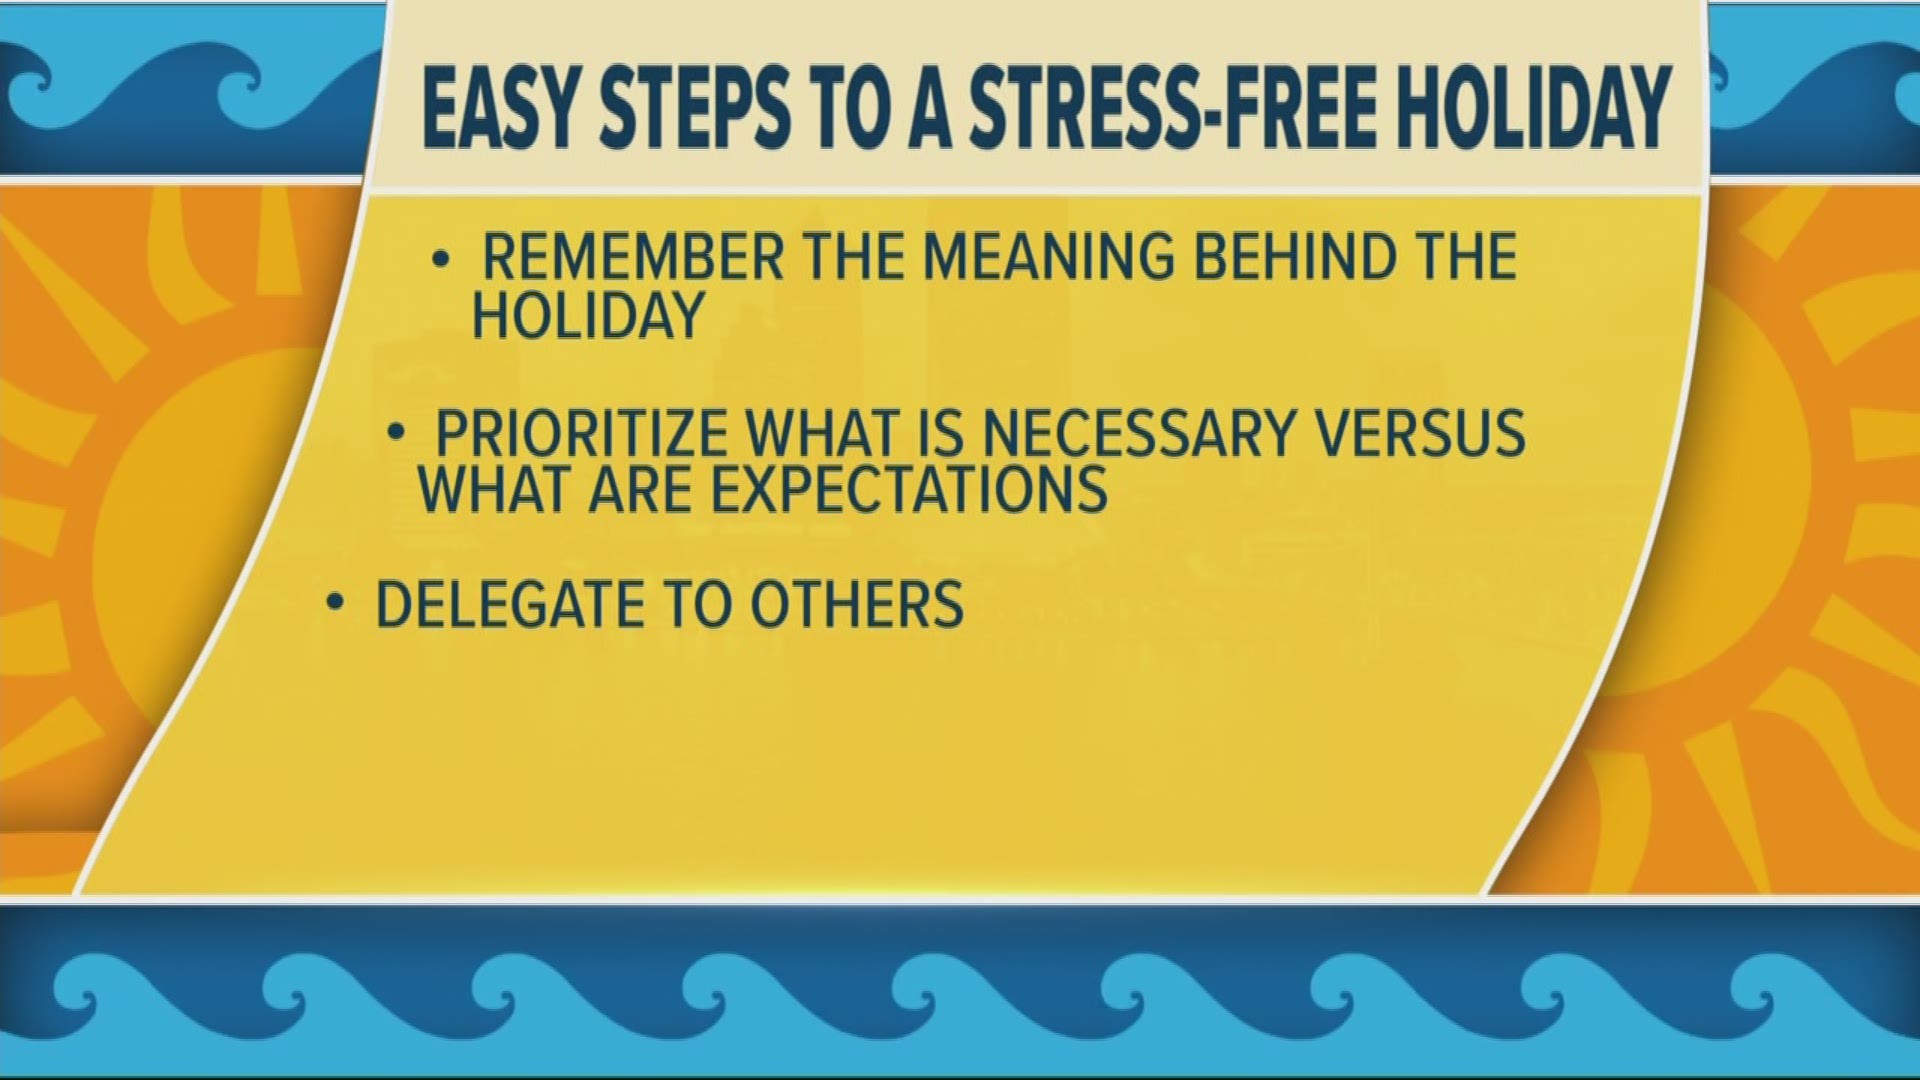 The holidays can be cheerful, but they can also be stressful!